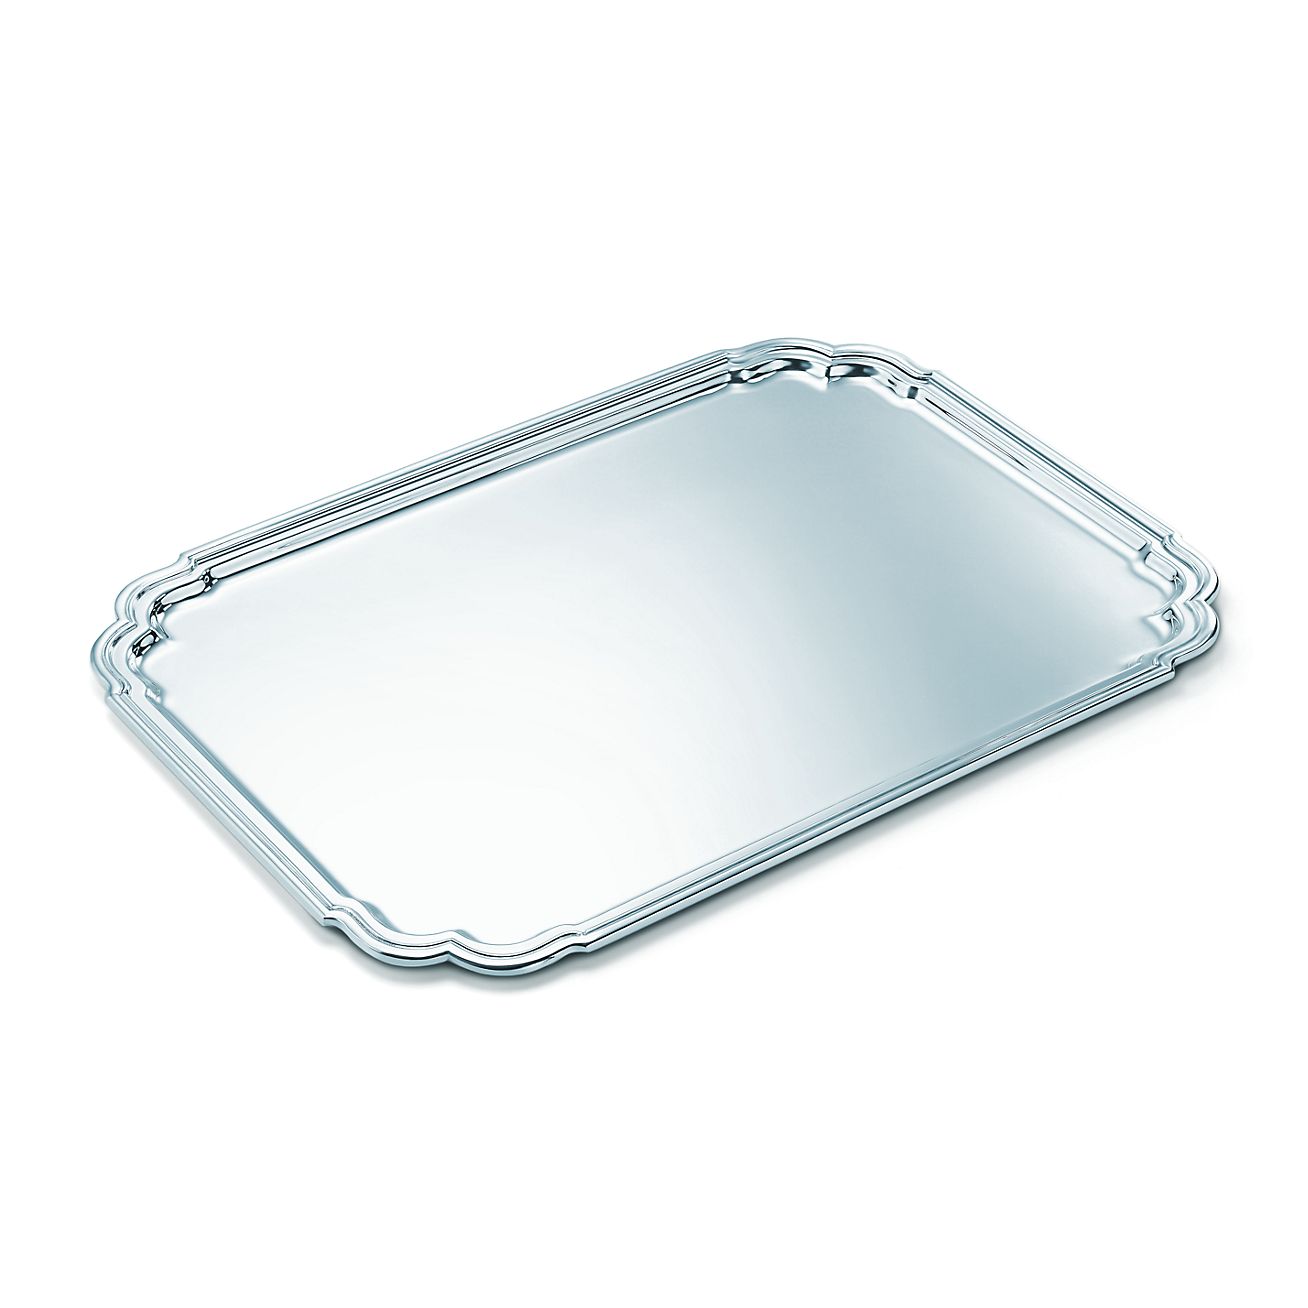 Details about  / Set of 2 Rectangular silver /& Gold Stainless Steel serving tray with handles